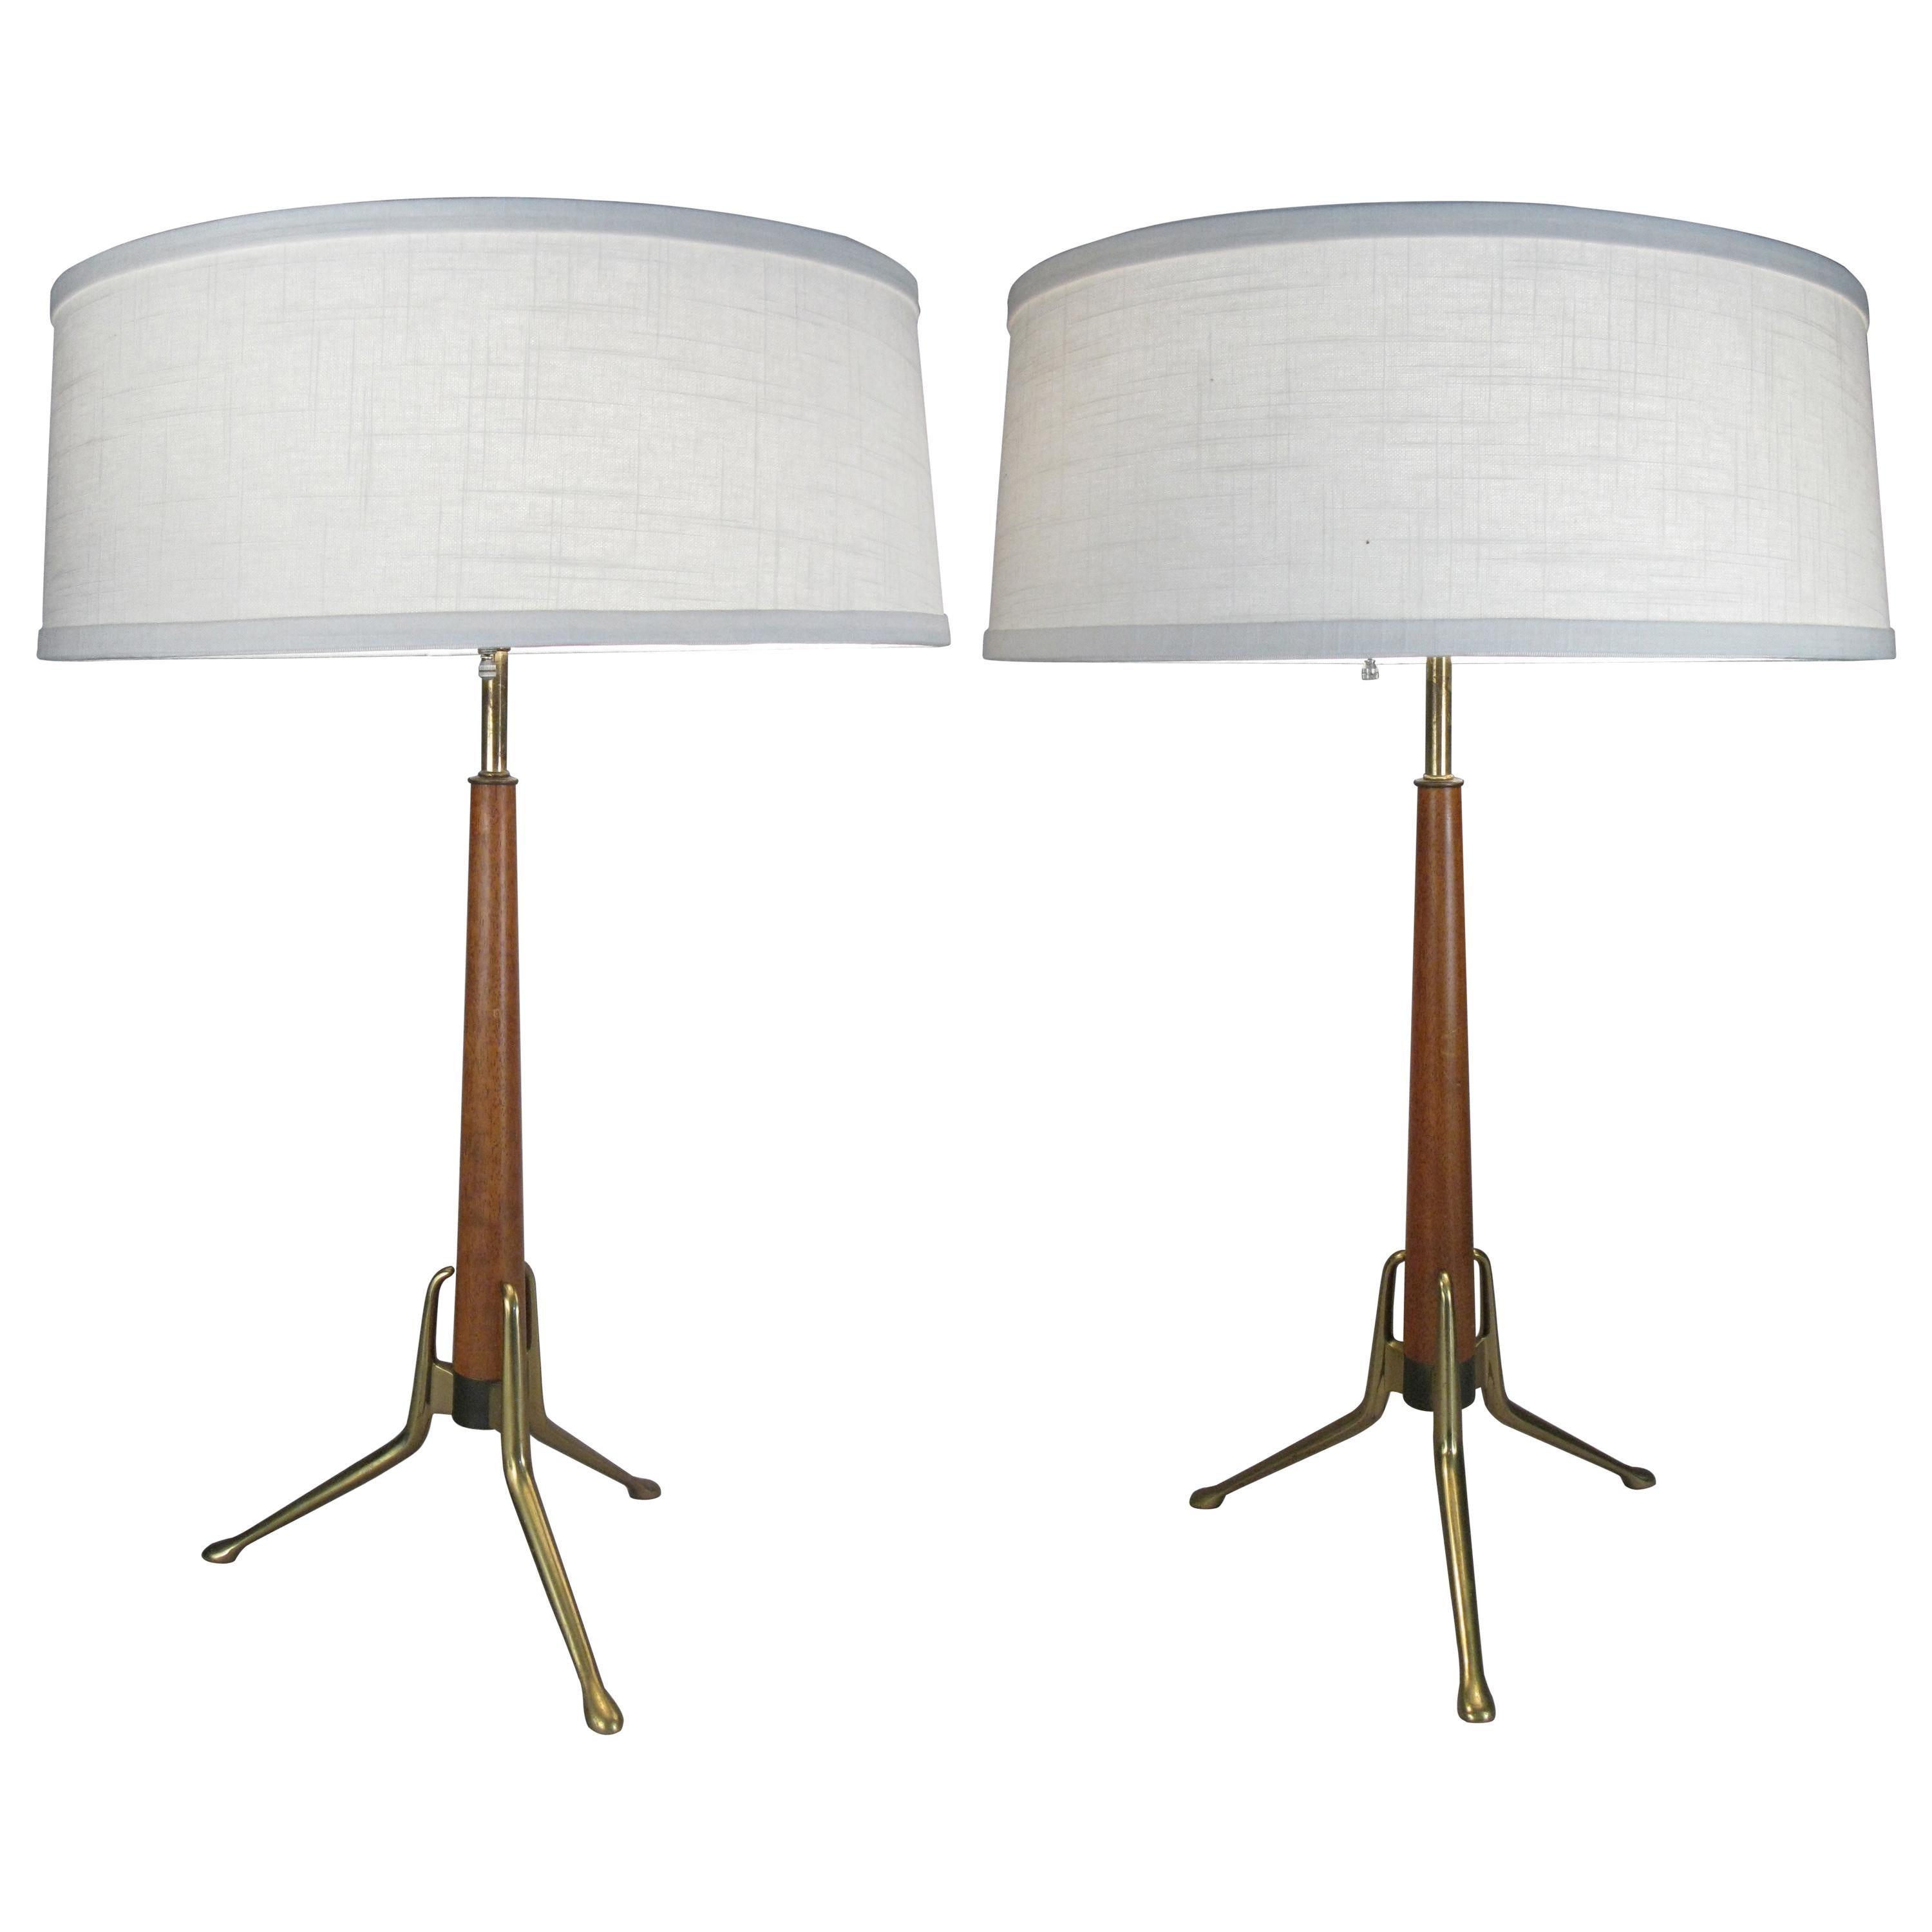 Pair of Brass and Walnut Lamps by Gerald Thurston for Lightolier